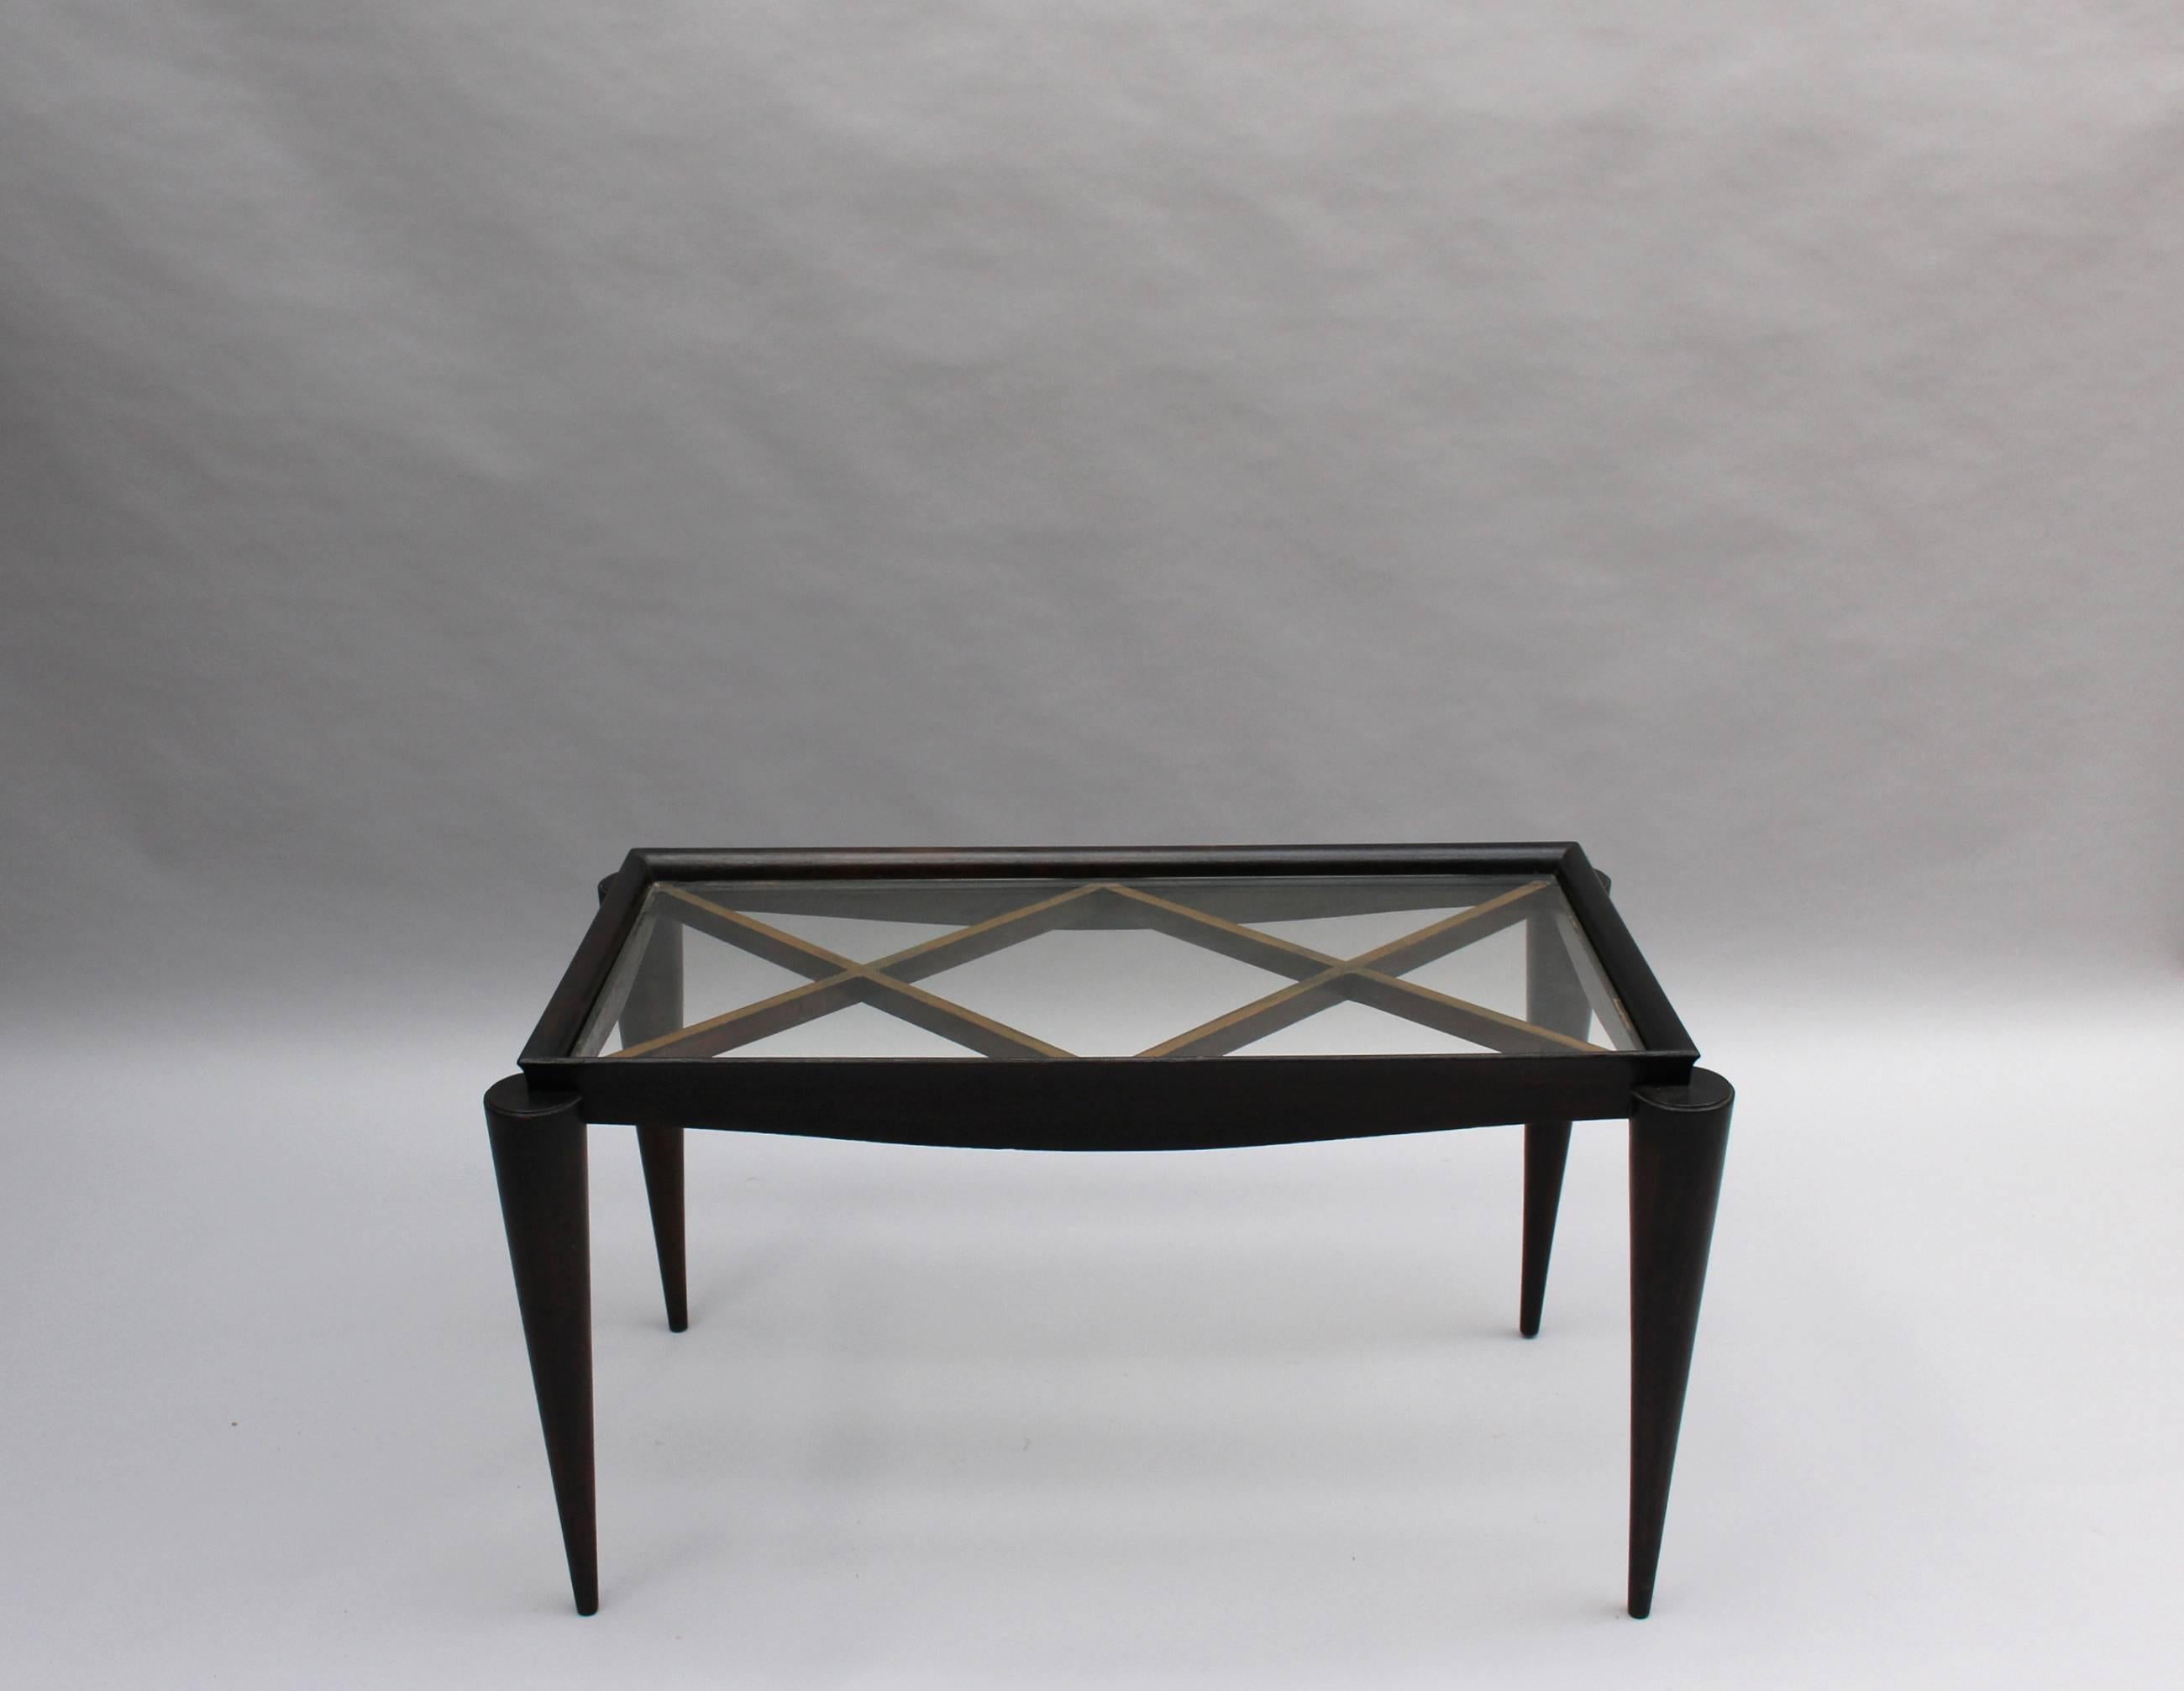 Fine French Art Deco Lacquered Coffee Table by Maxime Old In Good Condition For Sale In Long Island City, NY